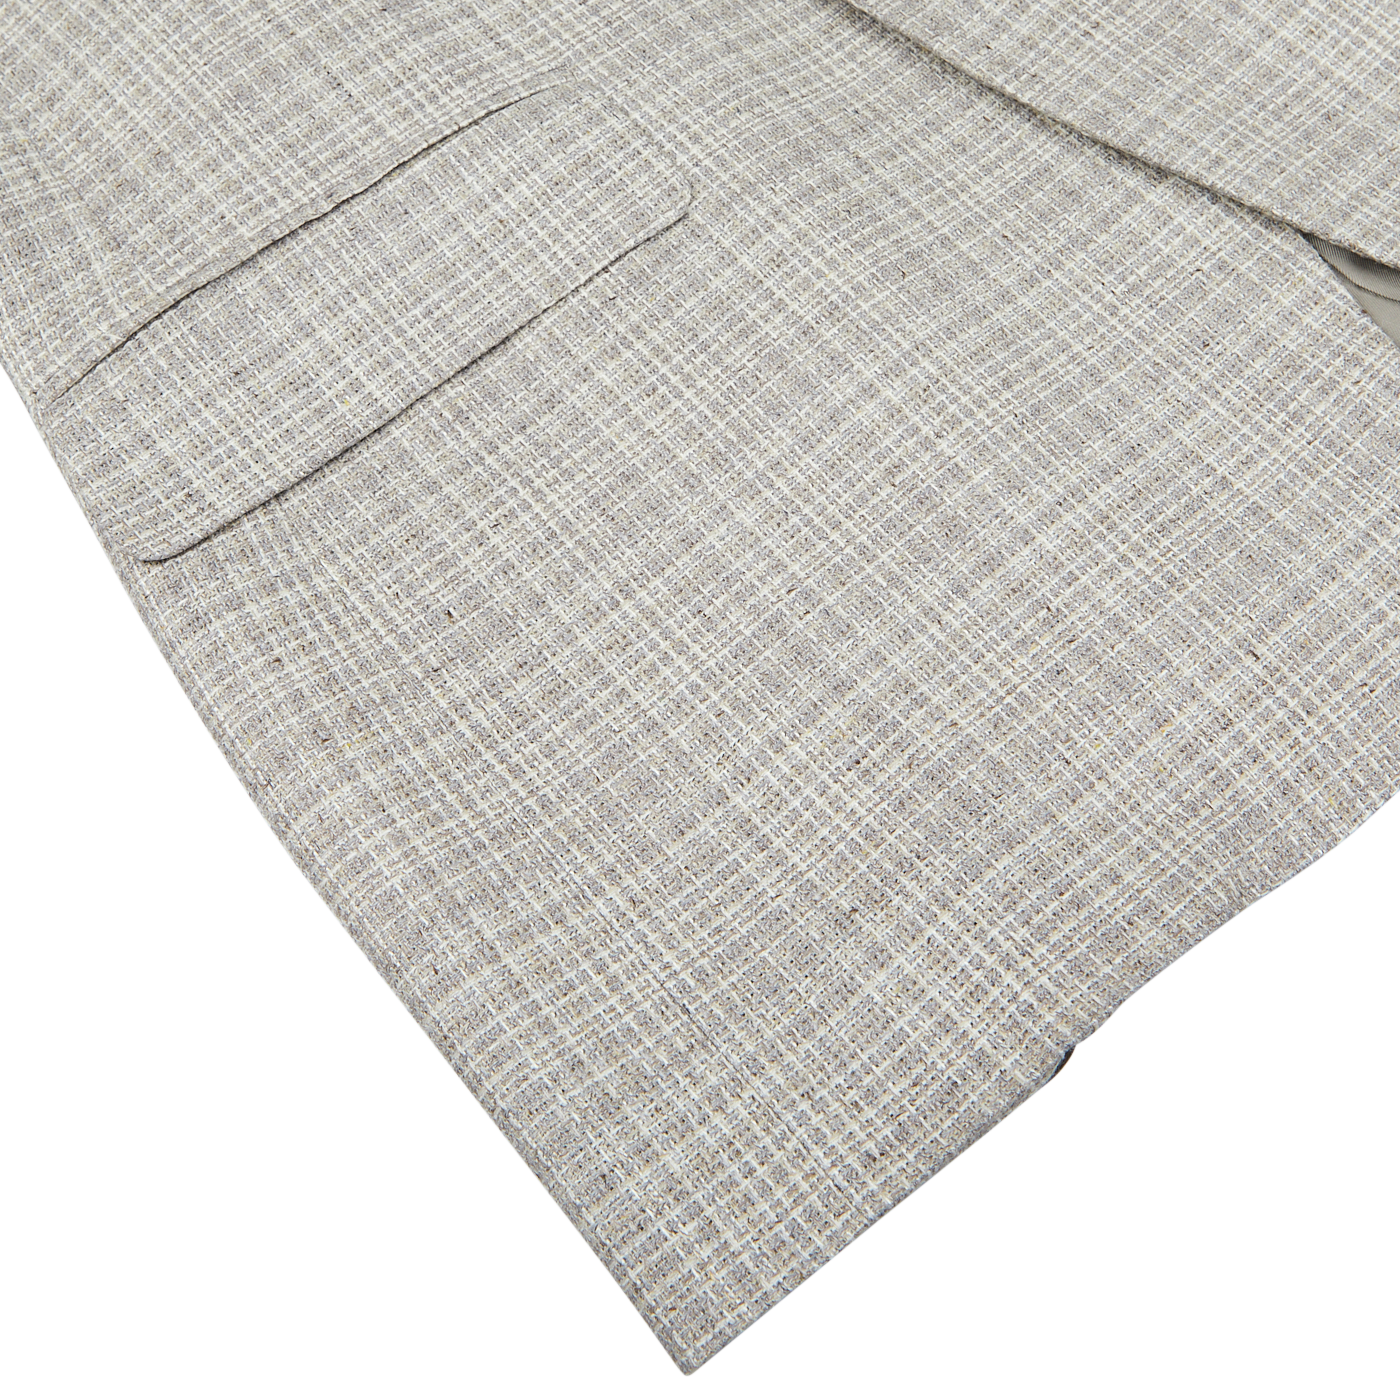 Close-up of a Beige Melange Silk Wool Basketweave Blazer in gray textured fabric, possibly from Canali, displayed on a flat surface.